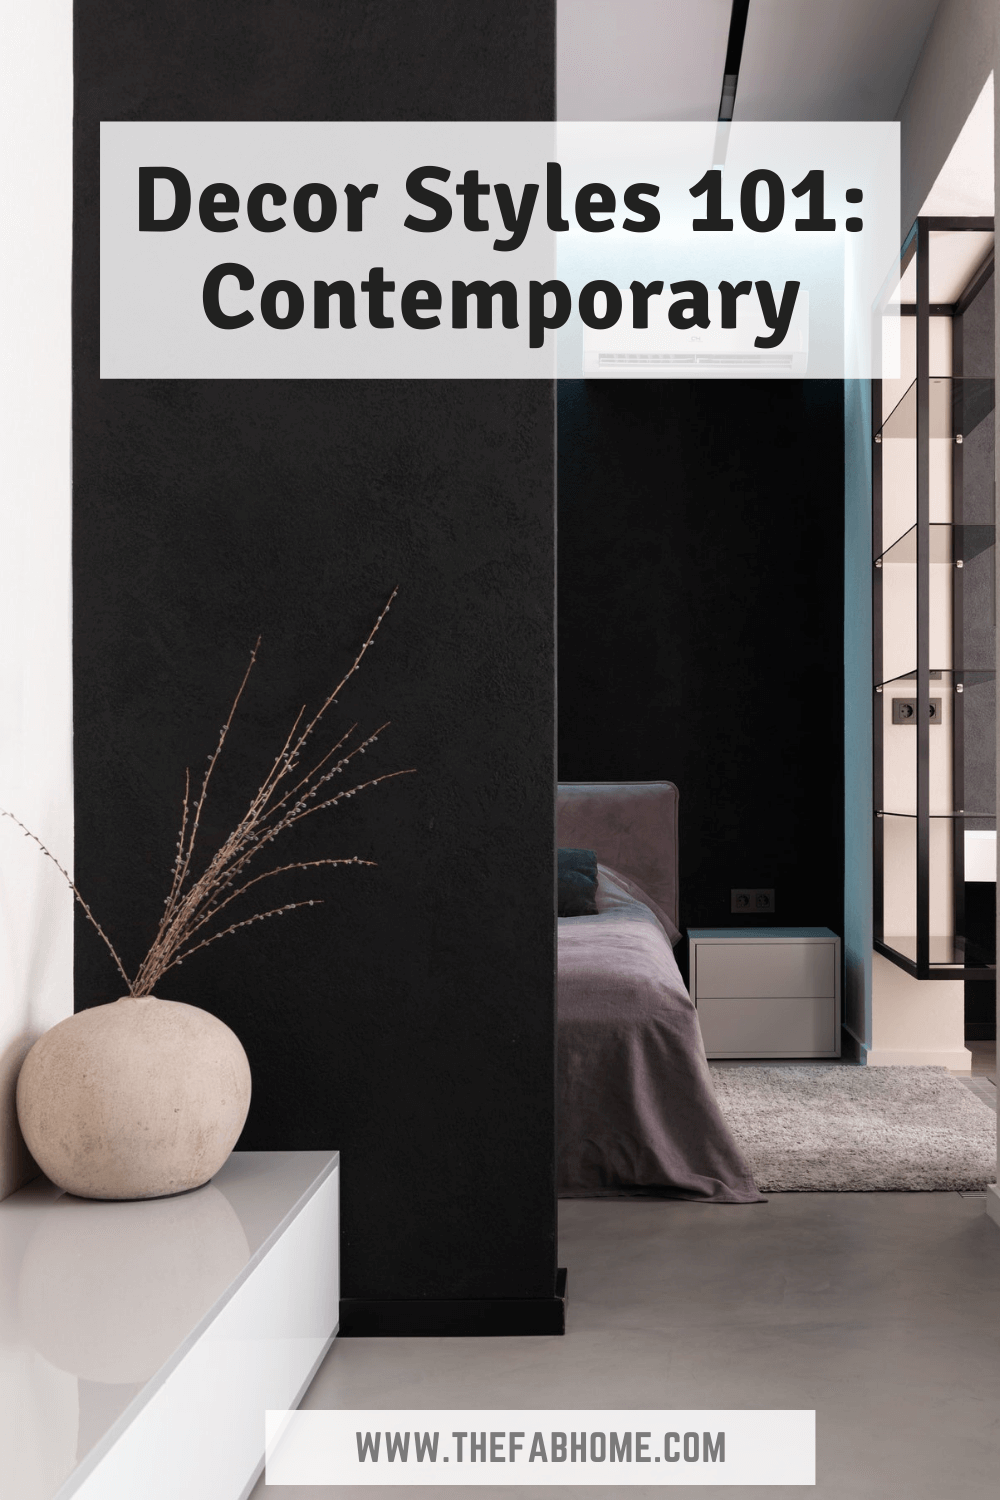 Love sleek lines and a clean look? Then the contemporary decor style is for you! Learn all about how to turn your home into a stylish, contemporary space.